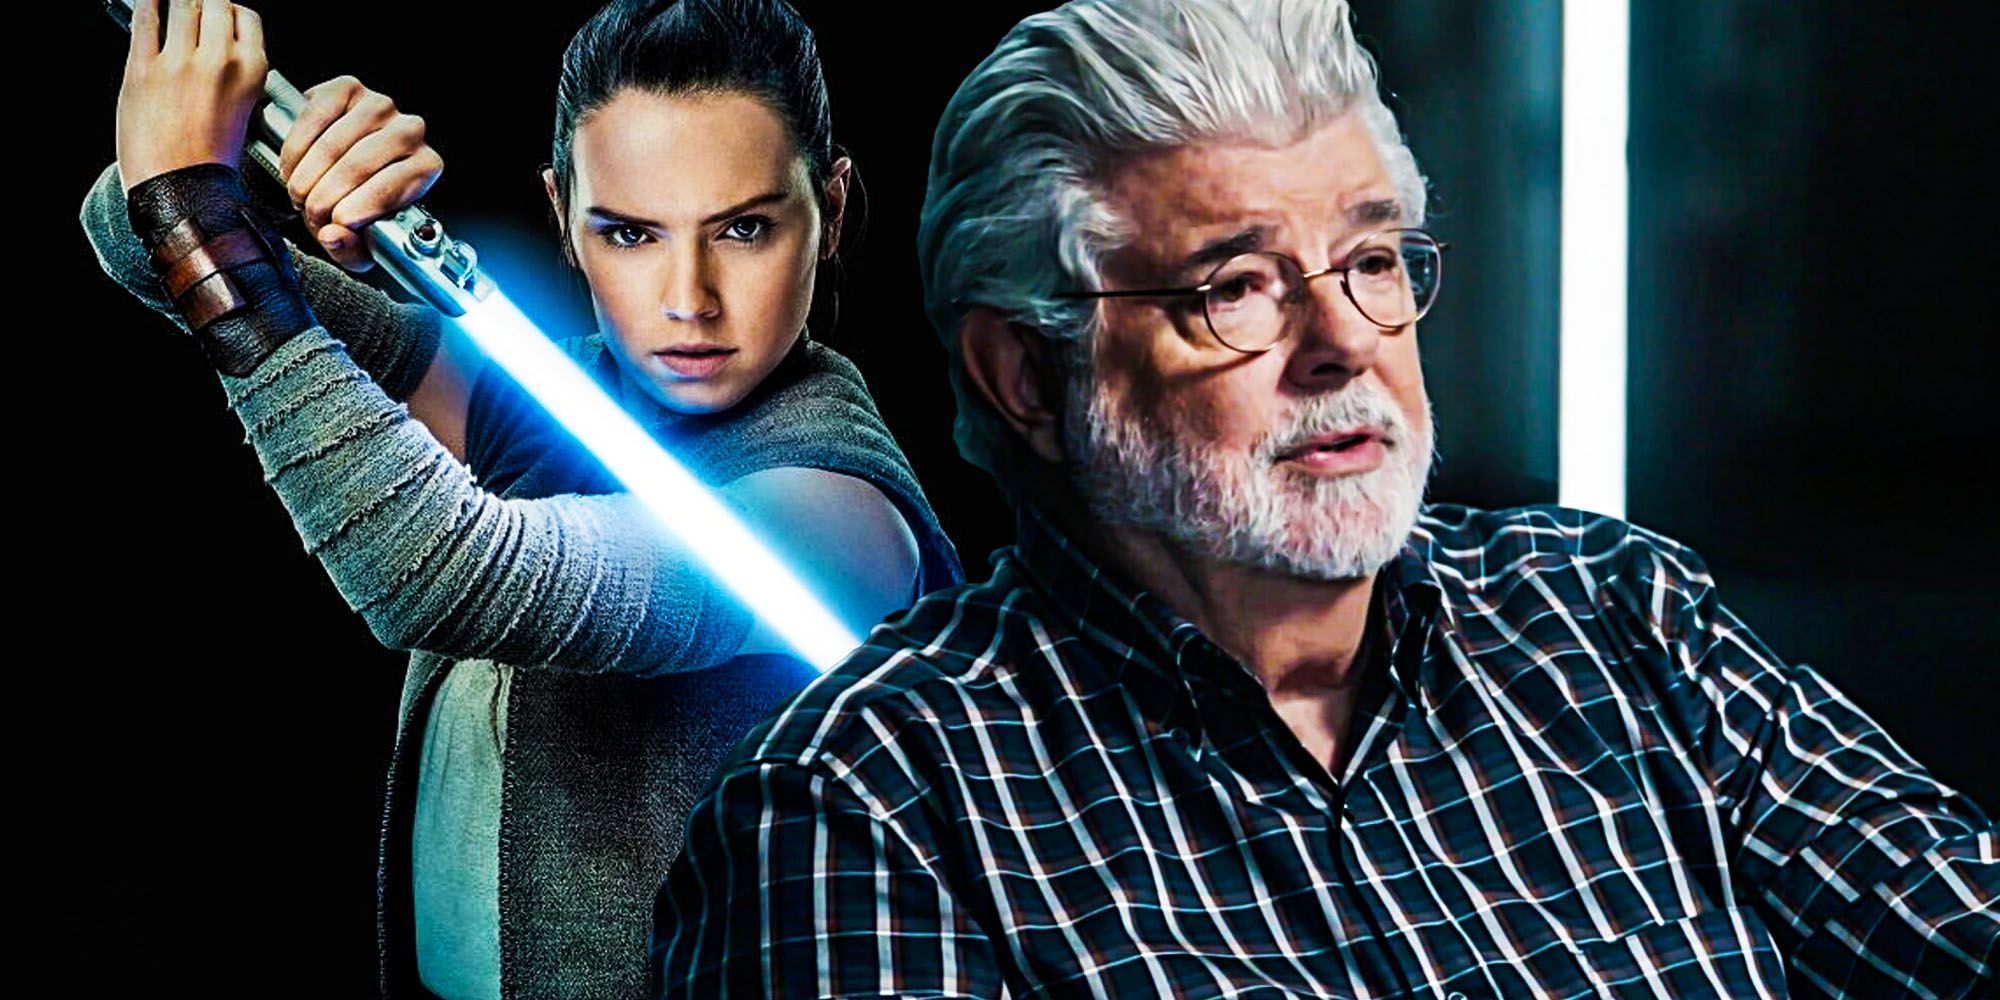 George Lucas original plan for Lightsabers Kyber Crystals